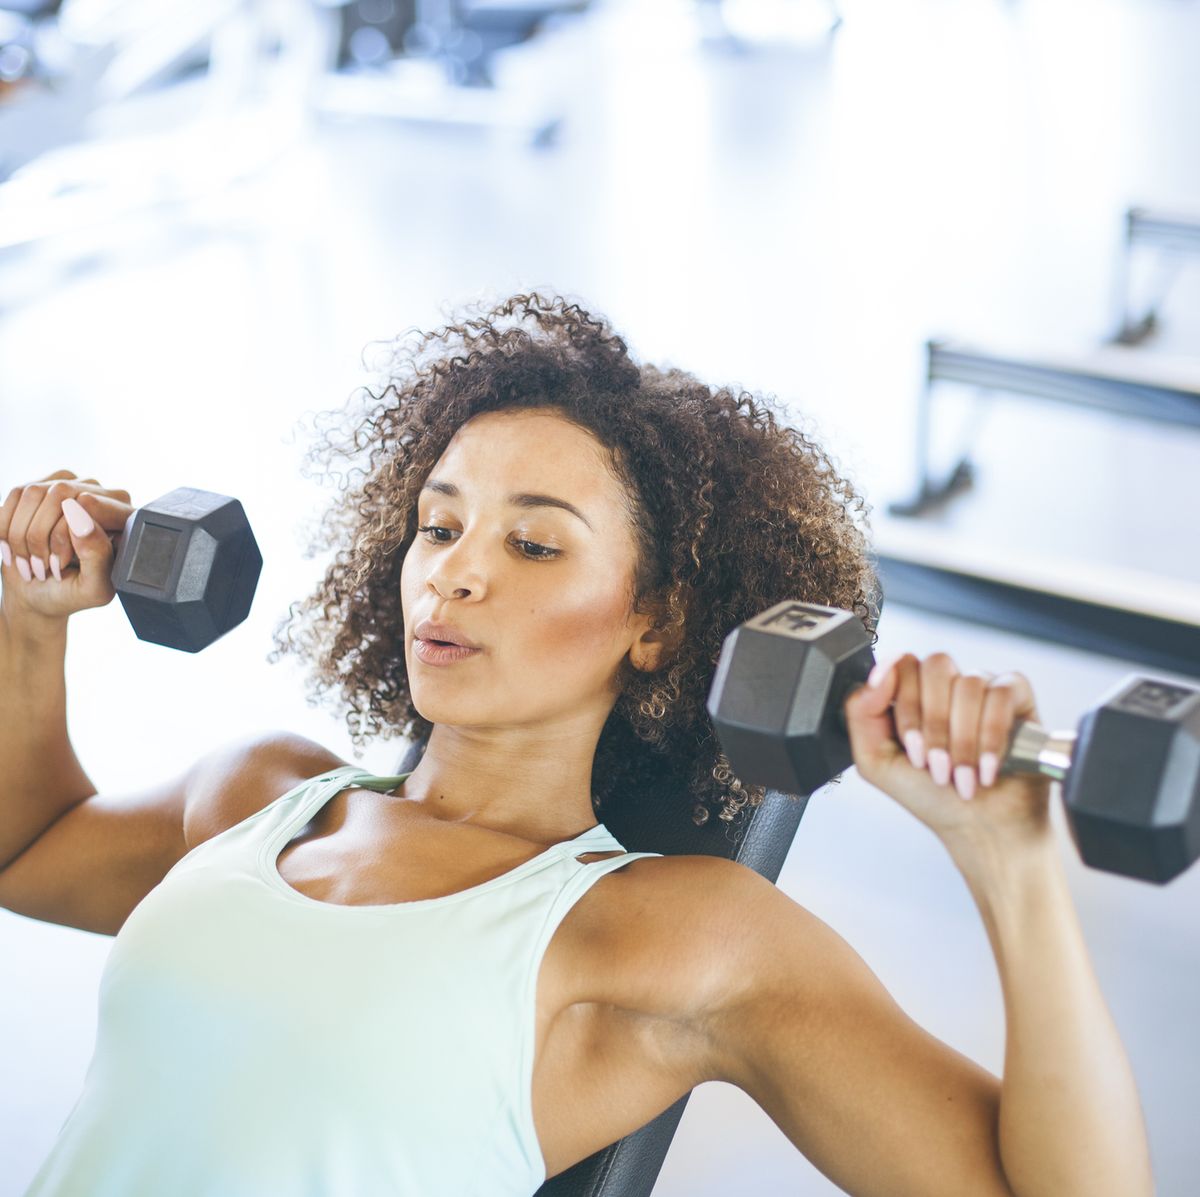 Weight-Training Exercises for Women Over 50